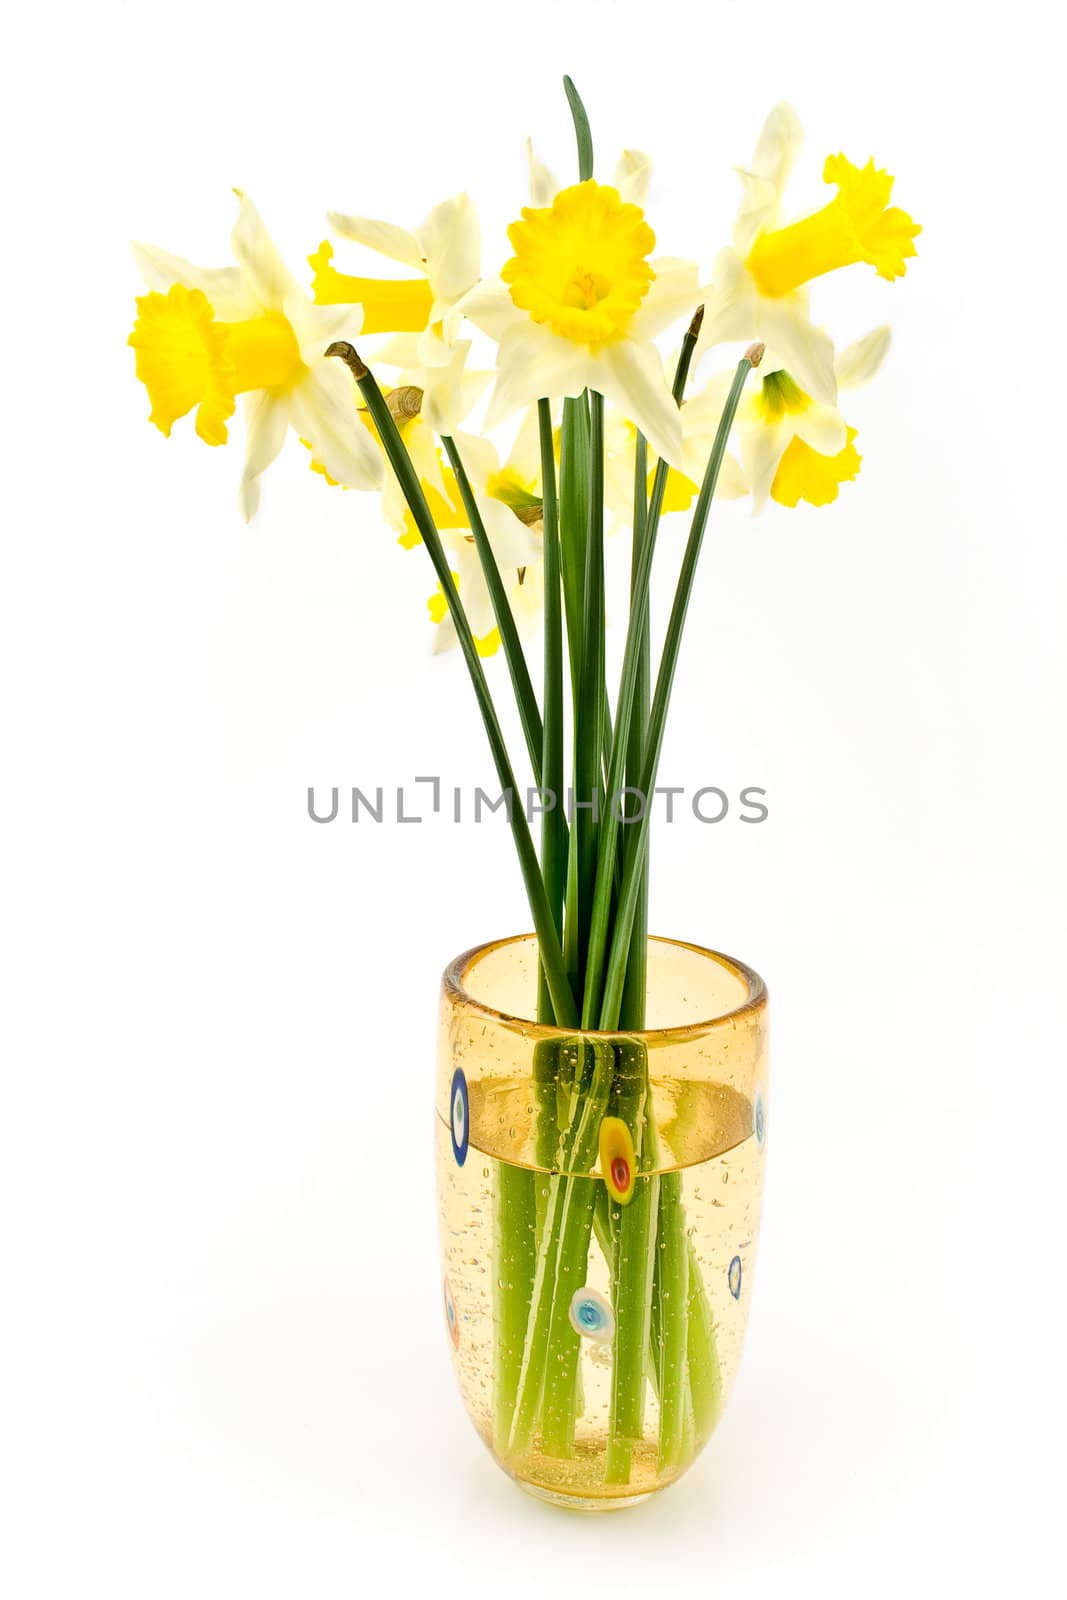 A bouquet of yellow daffodils narcissus  by gavran333